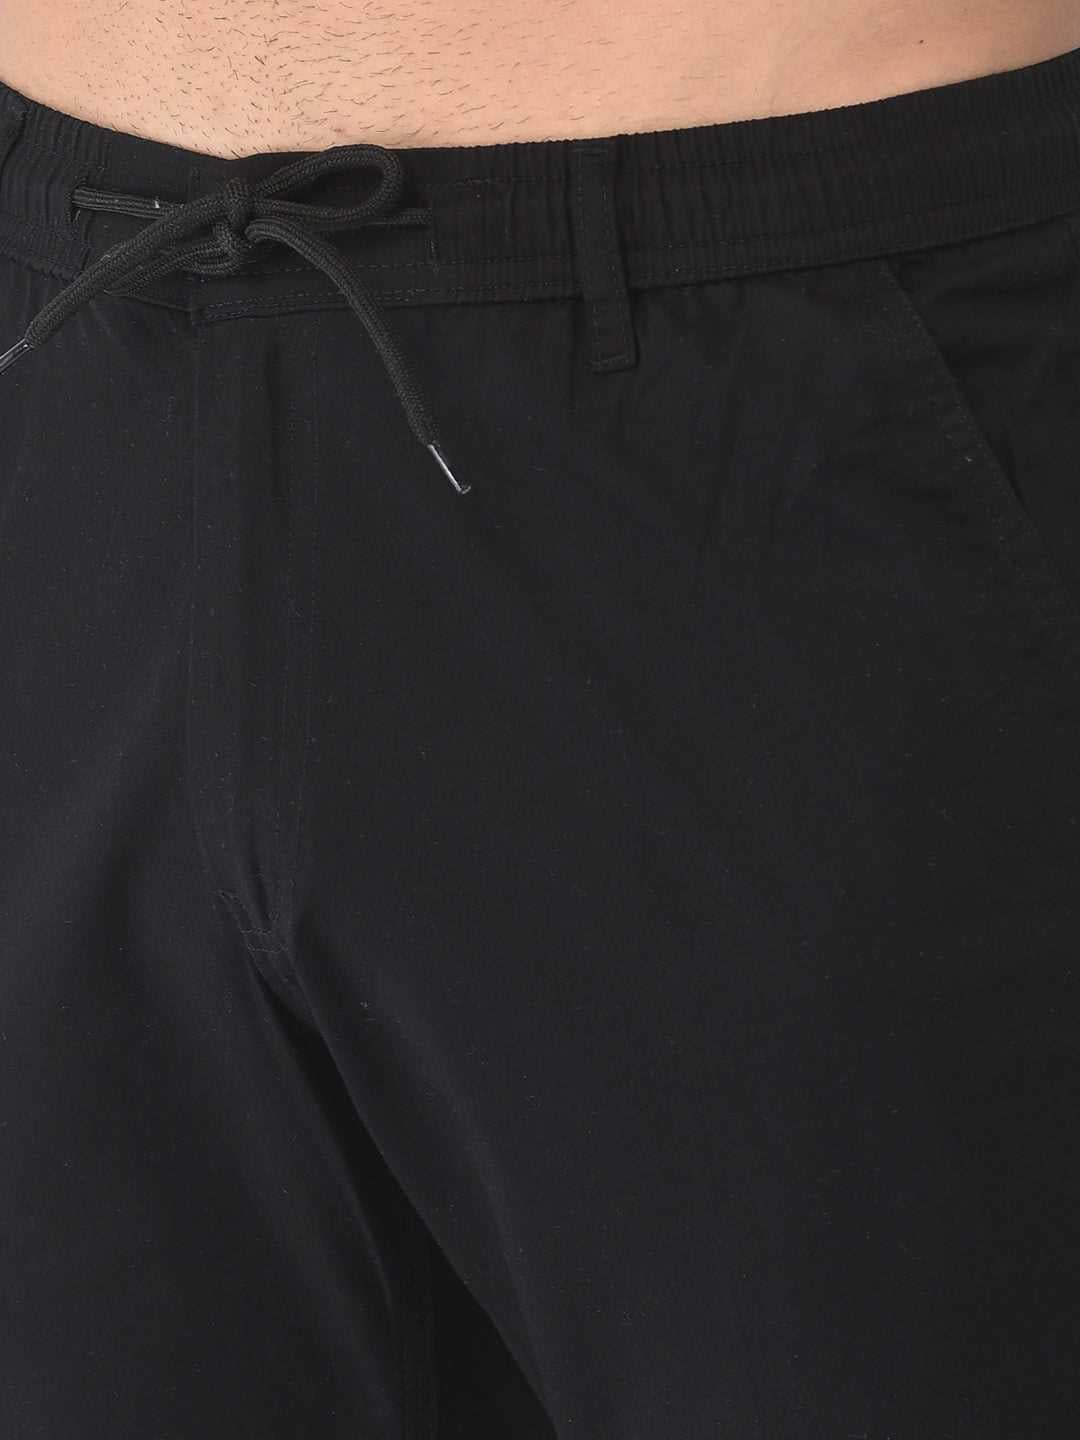 Buy Black Slim Fit Chinos Joggers Online - [Cobb Italy]